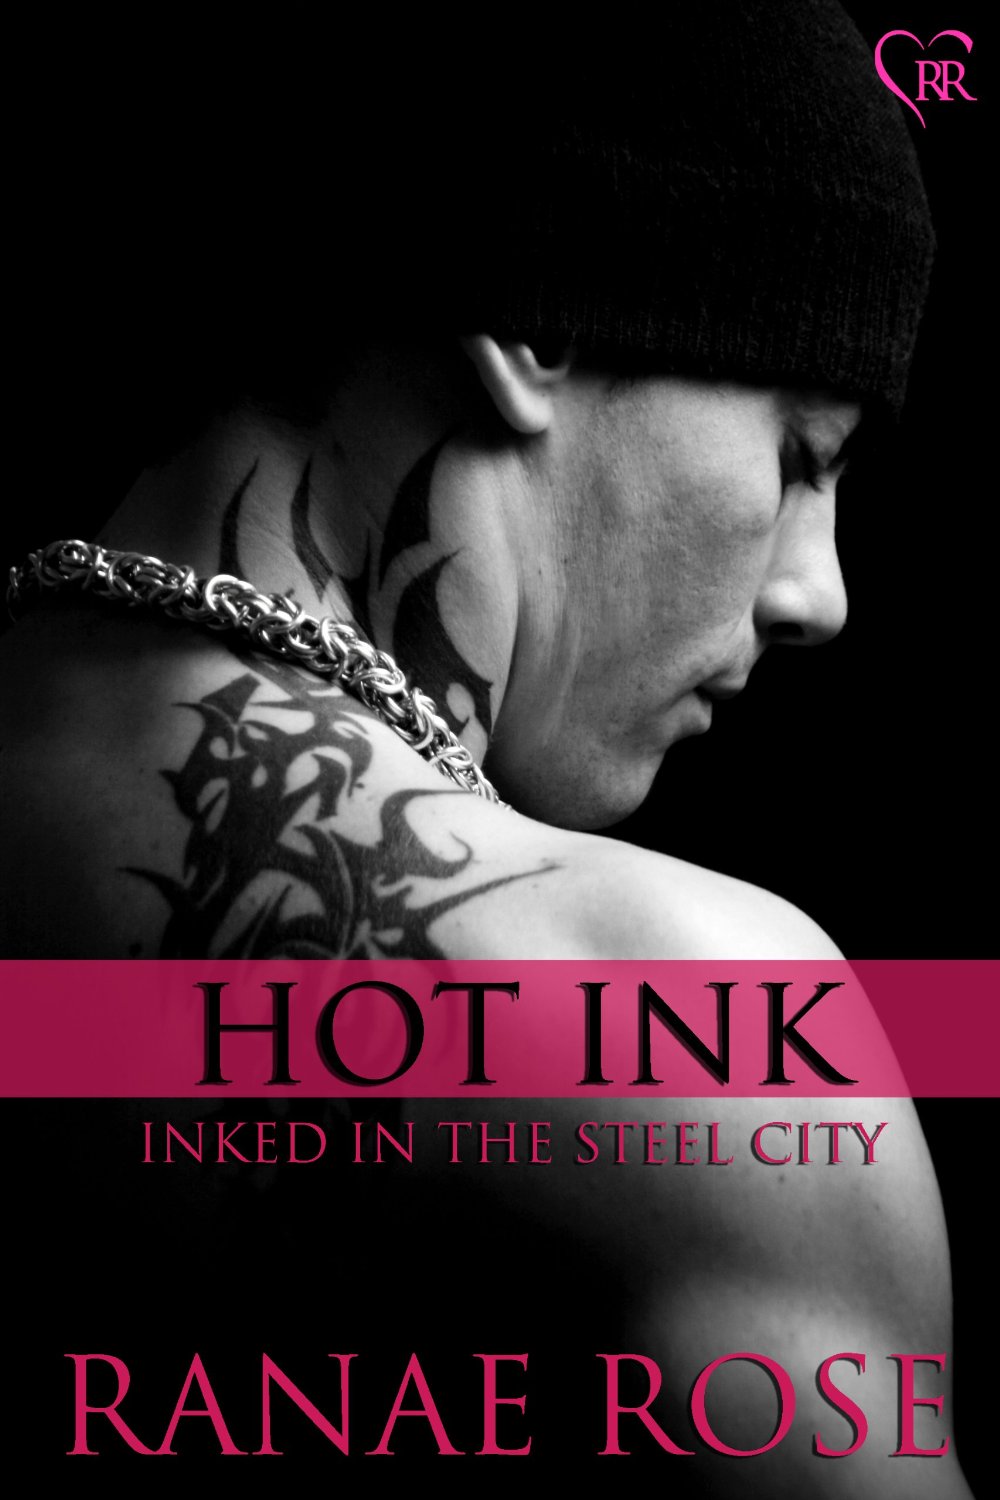 Hot Ink (Inked in the Steel City Book 1) by Ranae Rose